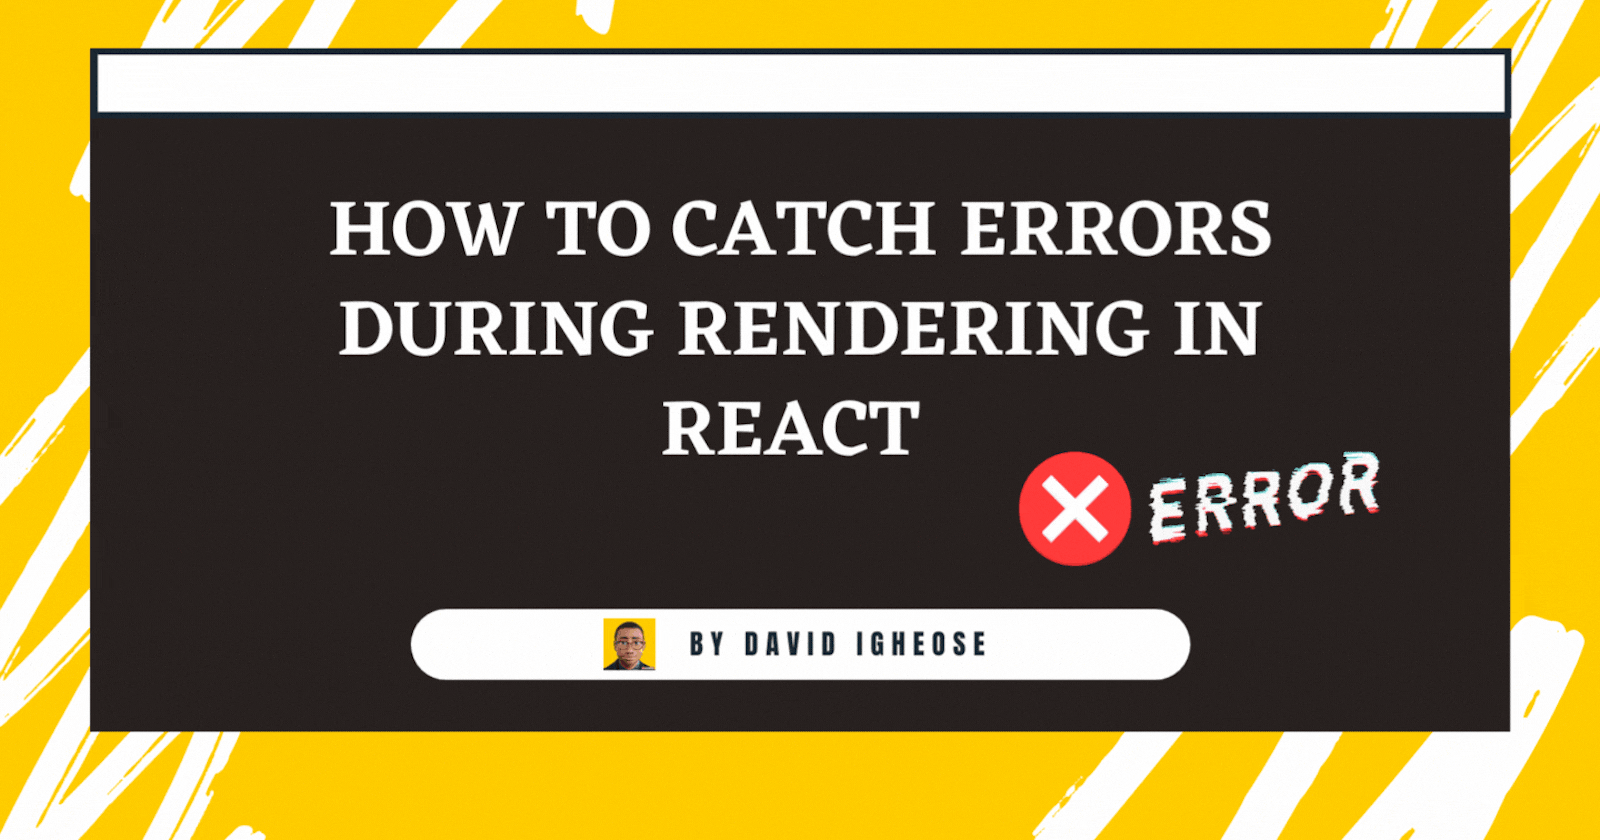 How to Catch Errors During Rendering in React